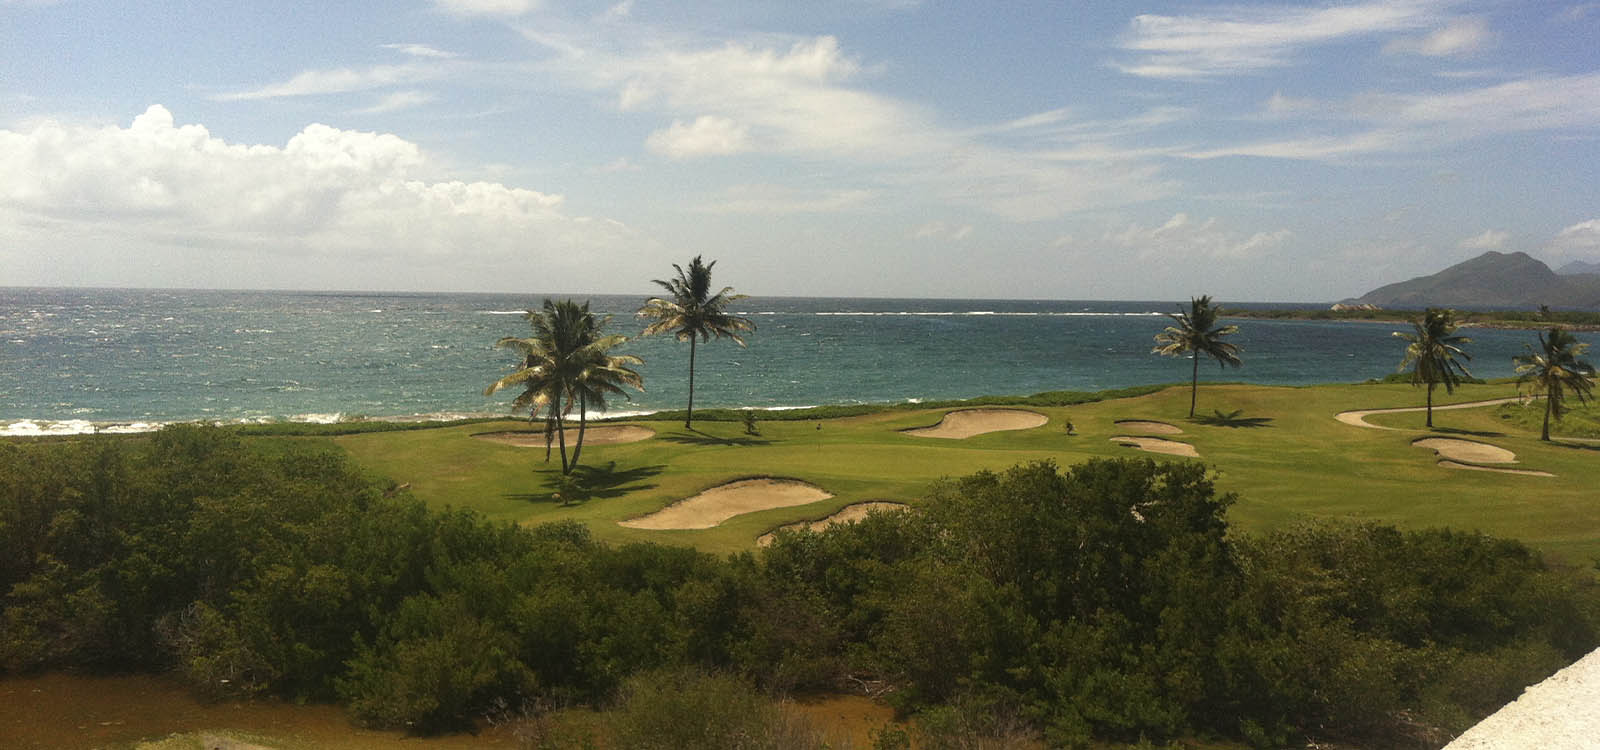 Golf course next to the beach in St Kitts and Nevis